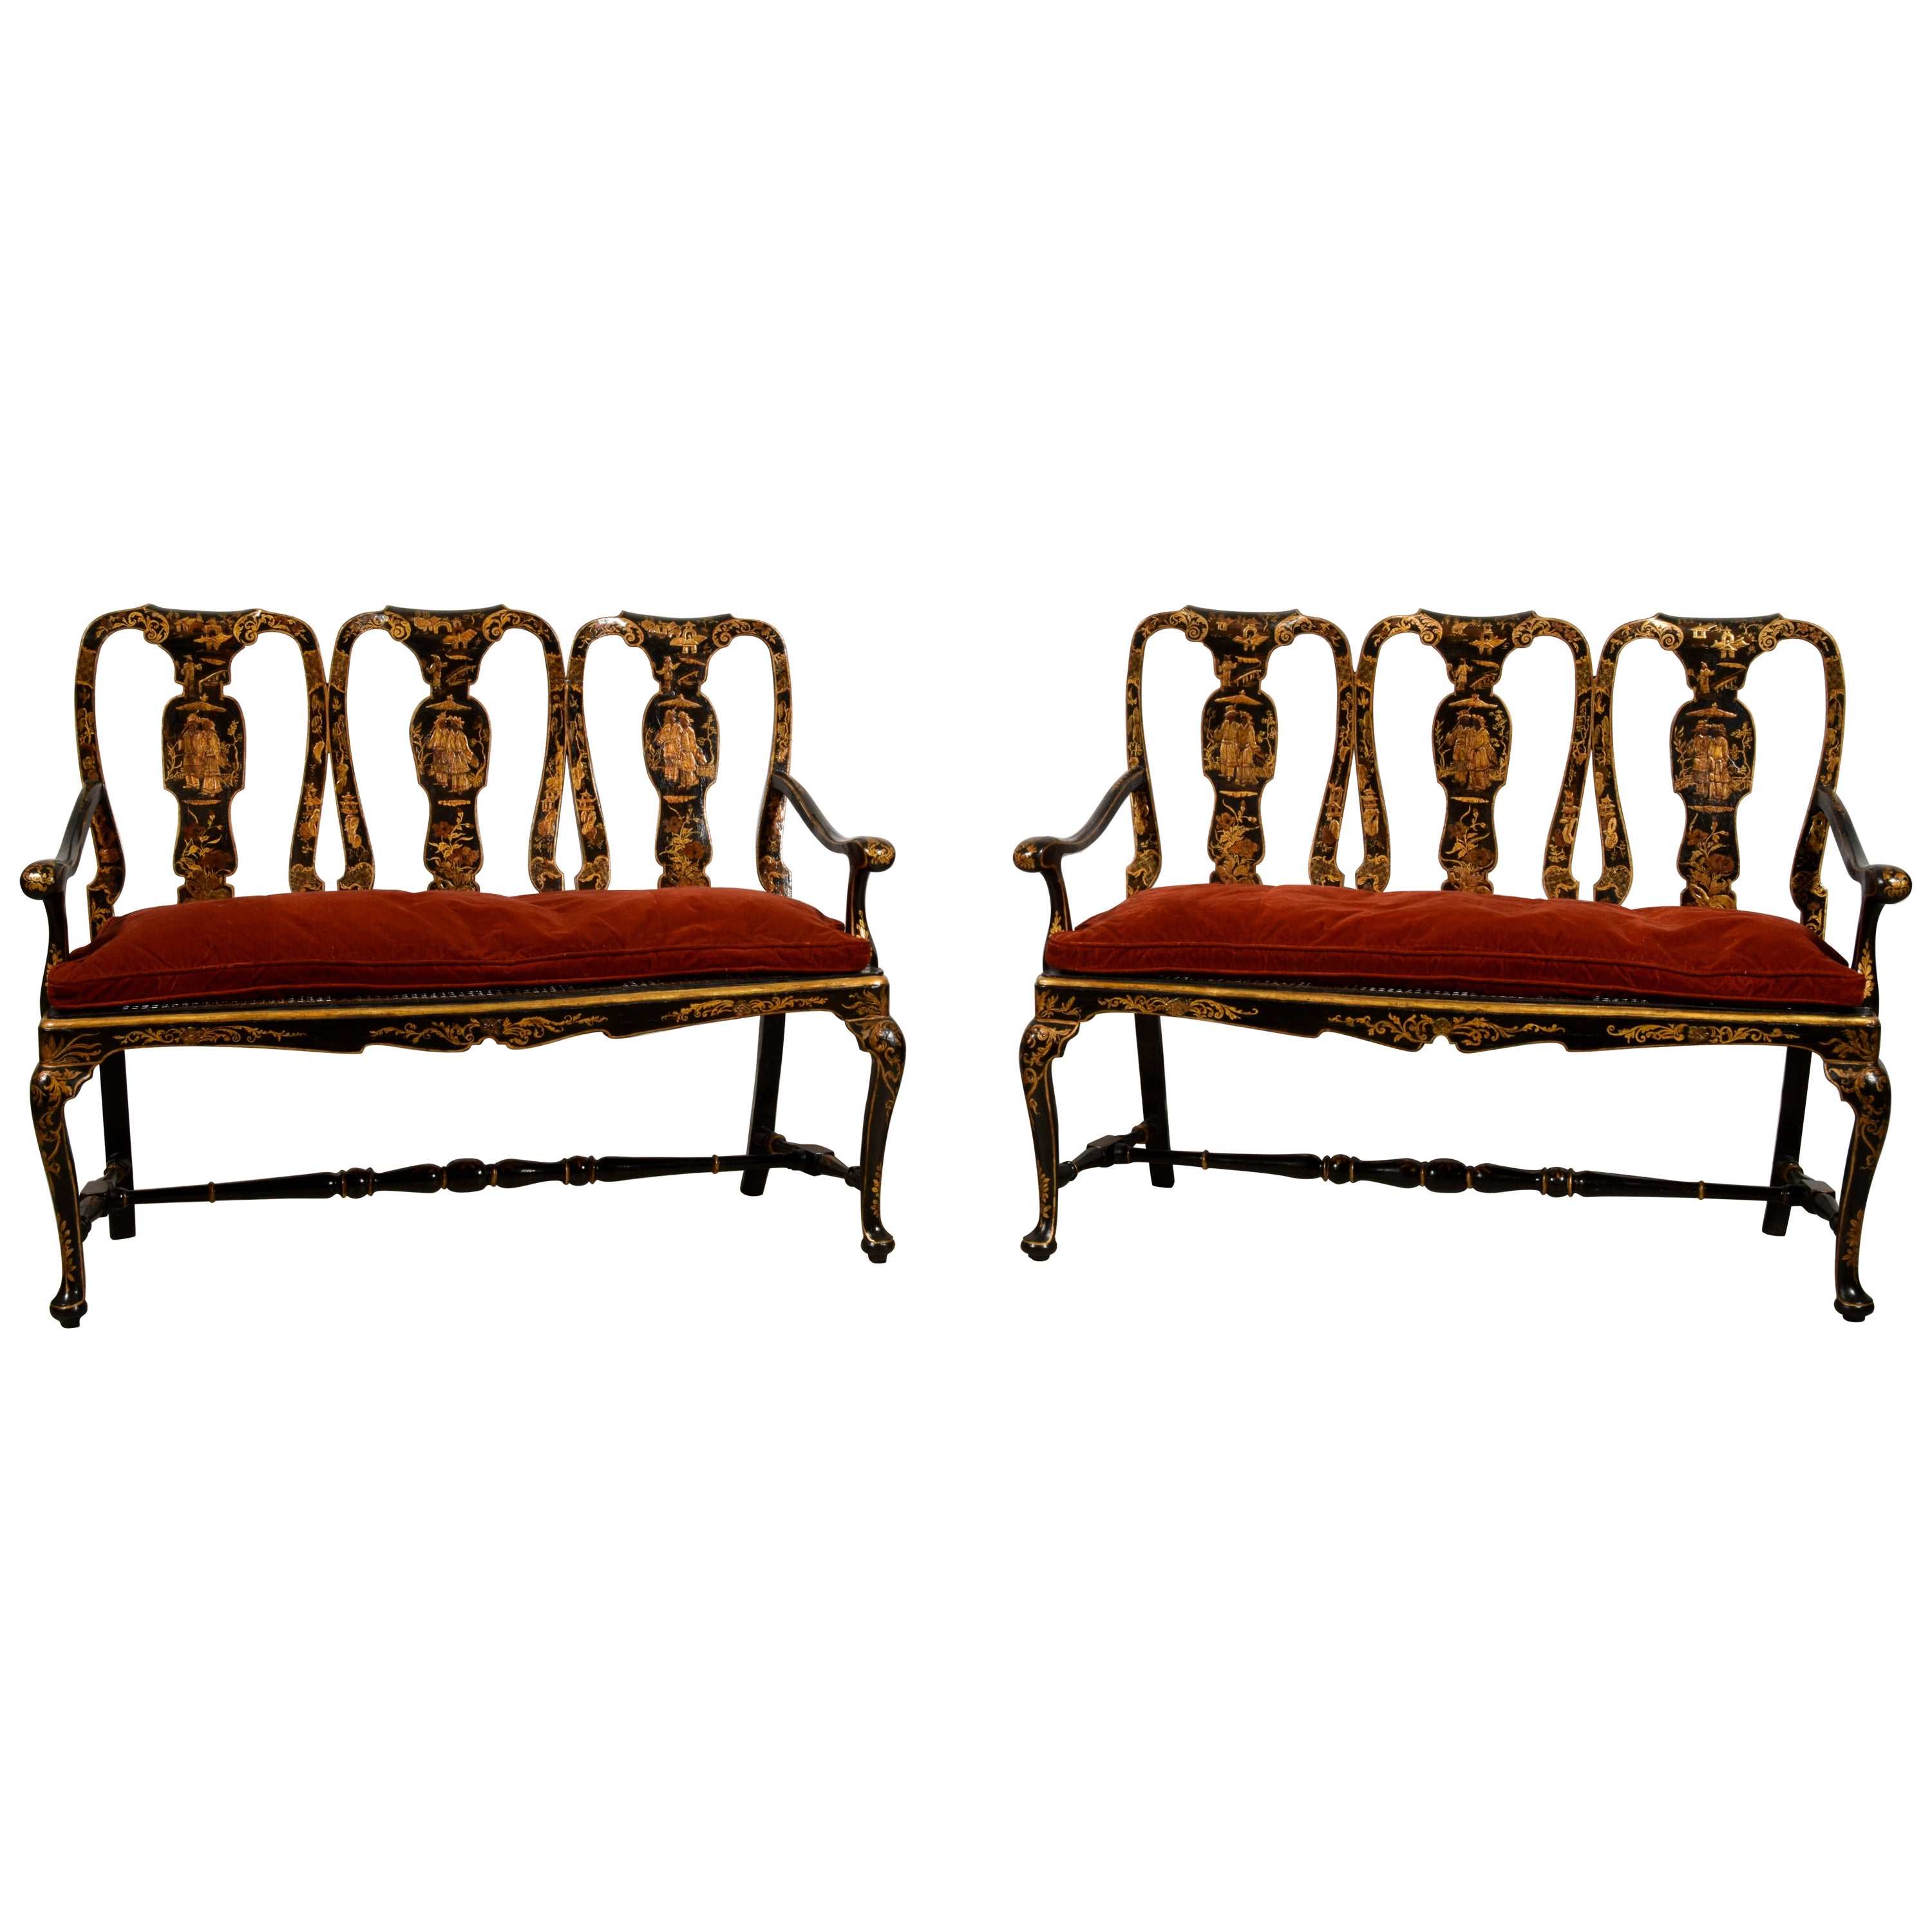 18th Century, Pair of Italian Lacquered Chinoiserie Wood Sofas For Sale